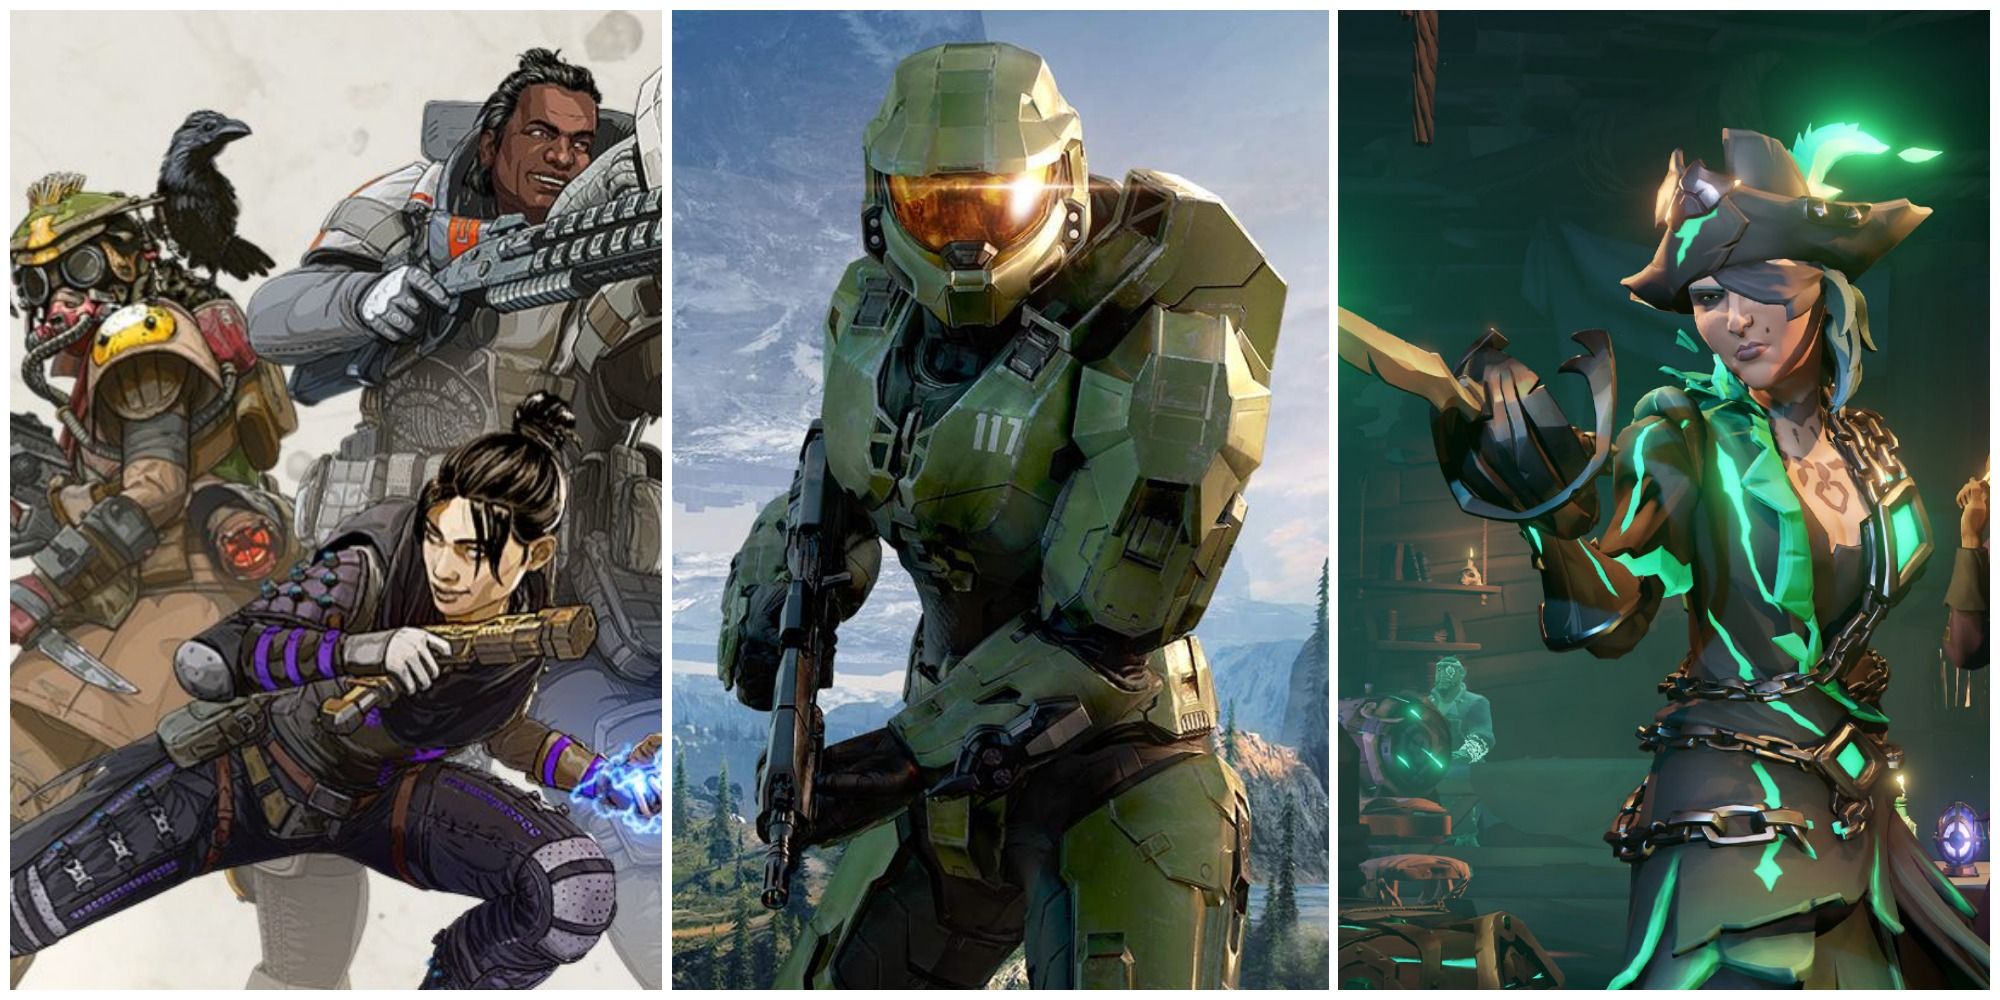 Split image of Bloodhound, Wraith, and Gibraltar from Apex Legends, Master Chief from Halo Infinite, and a pirate from Sea of Thieves